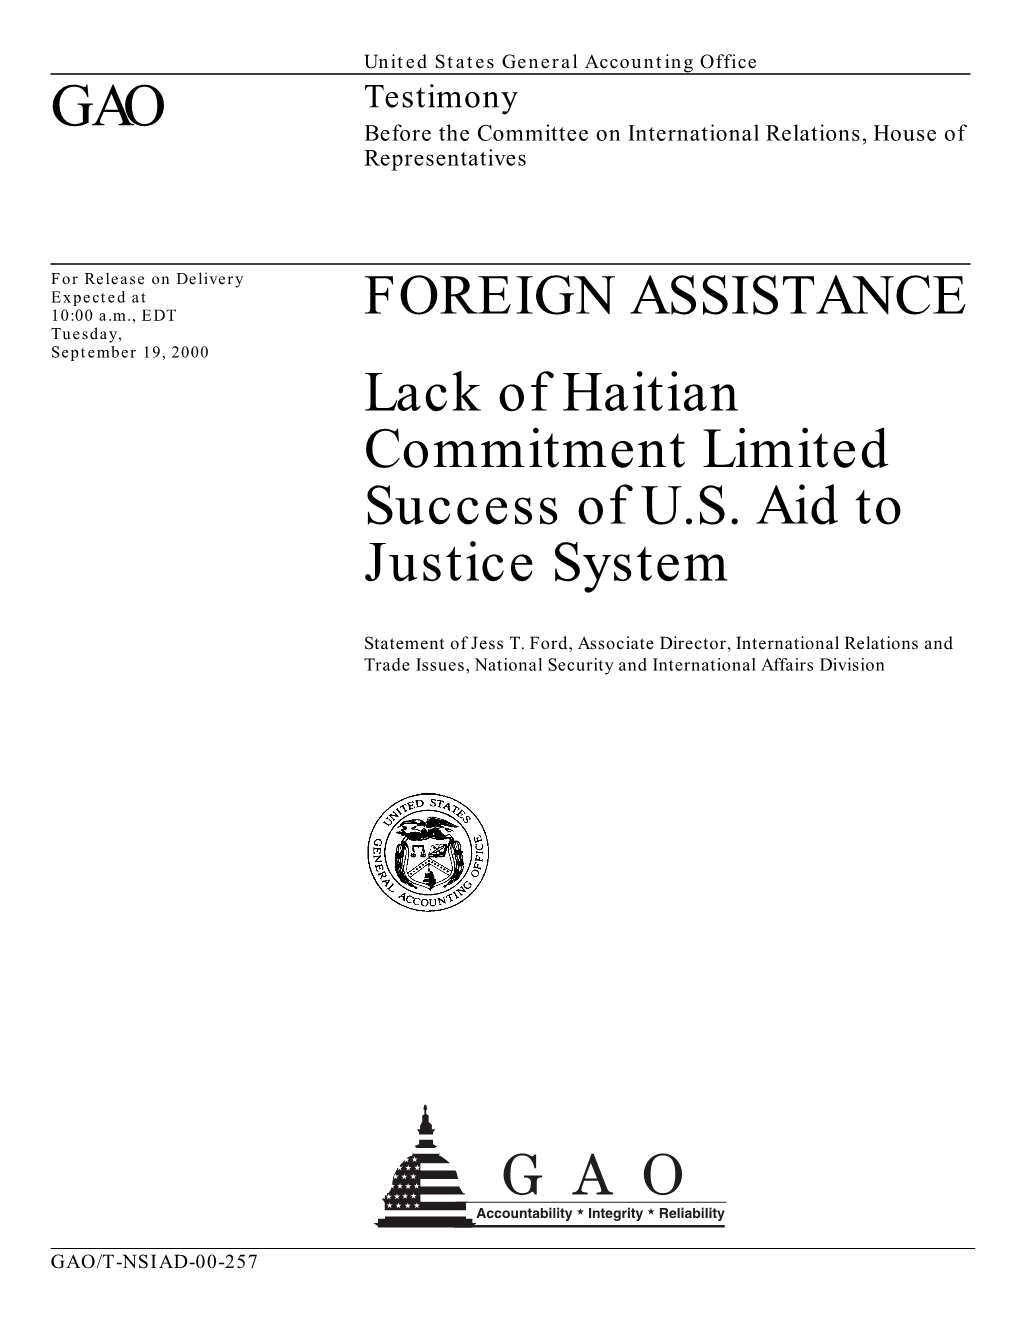 FOREIGN ASSISTANCE Lack of Haitian Commitment Limited